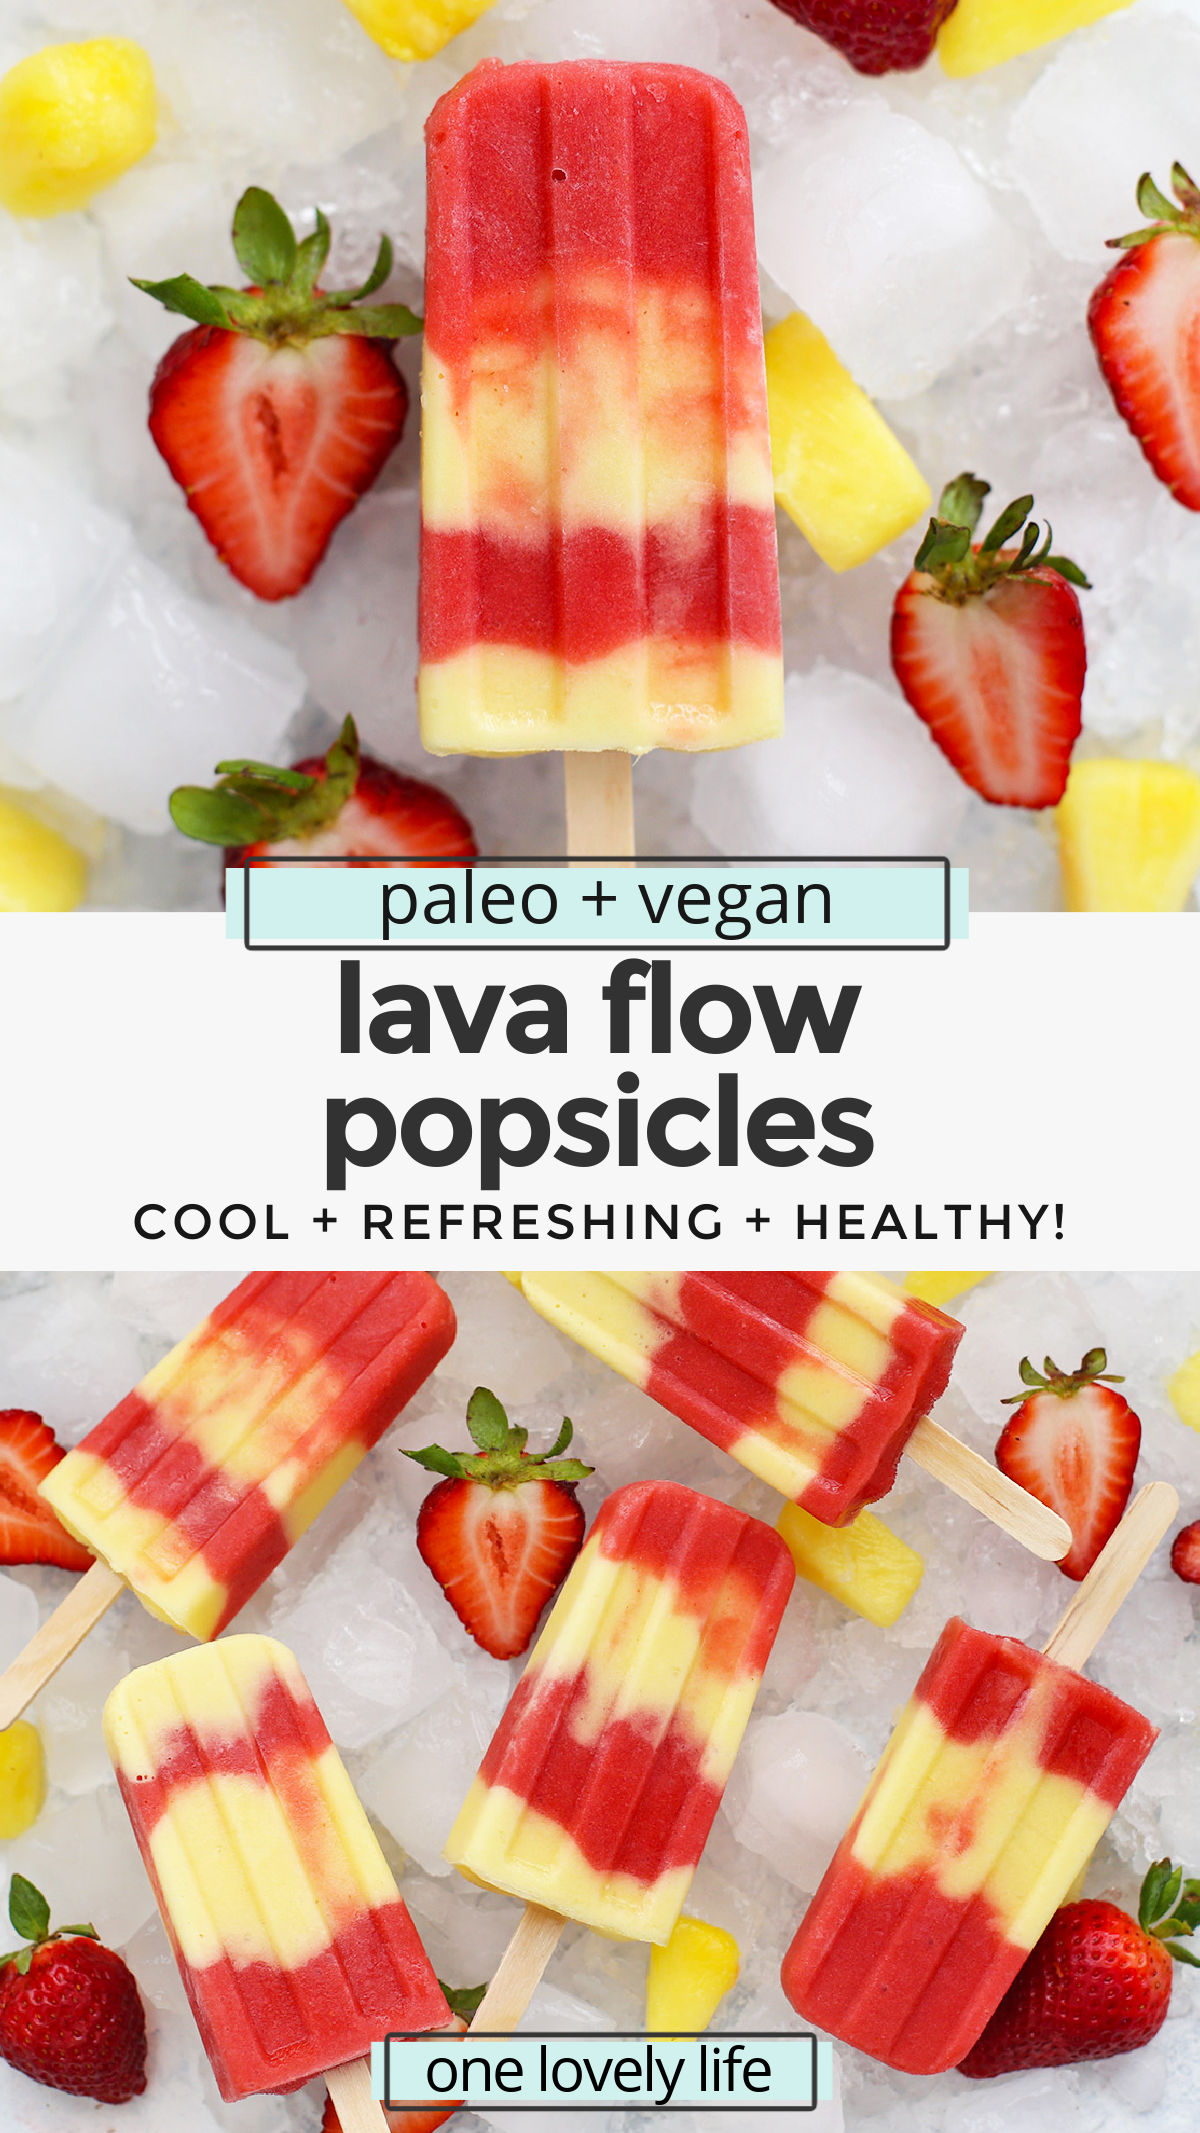 Lava Flow Popsicles - Creamy coconut pineapple swirled with fresh strawberry. Paleo, Vegan, and naturally sweetened! // Strawberry Pineapple Popsicles // Virgin Lava Flow Popsicles